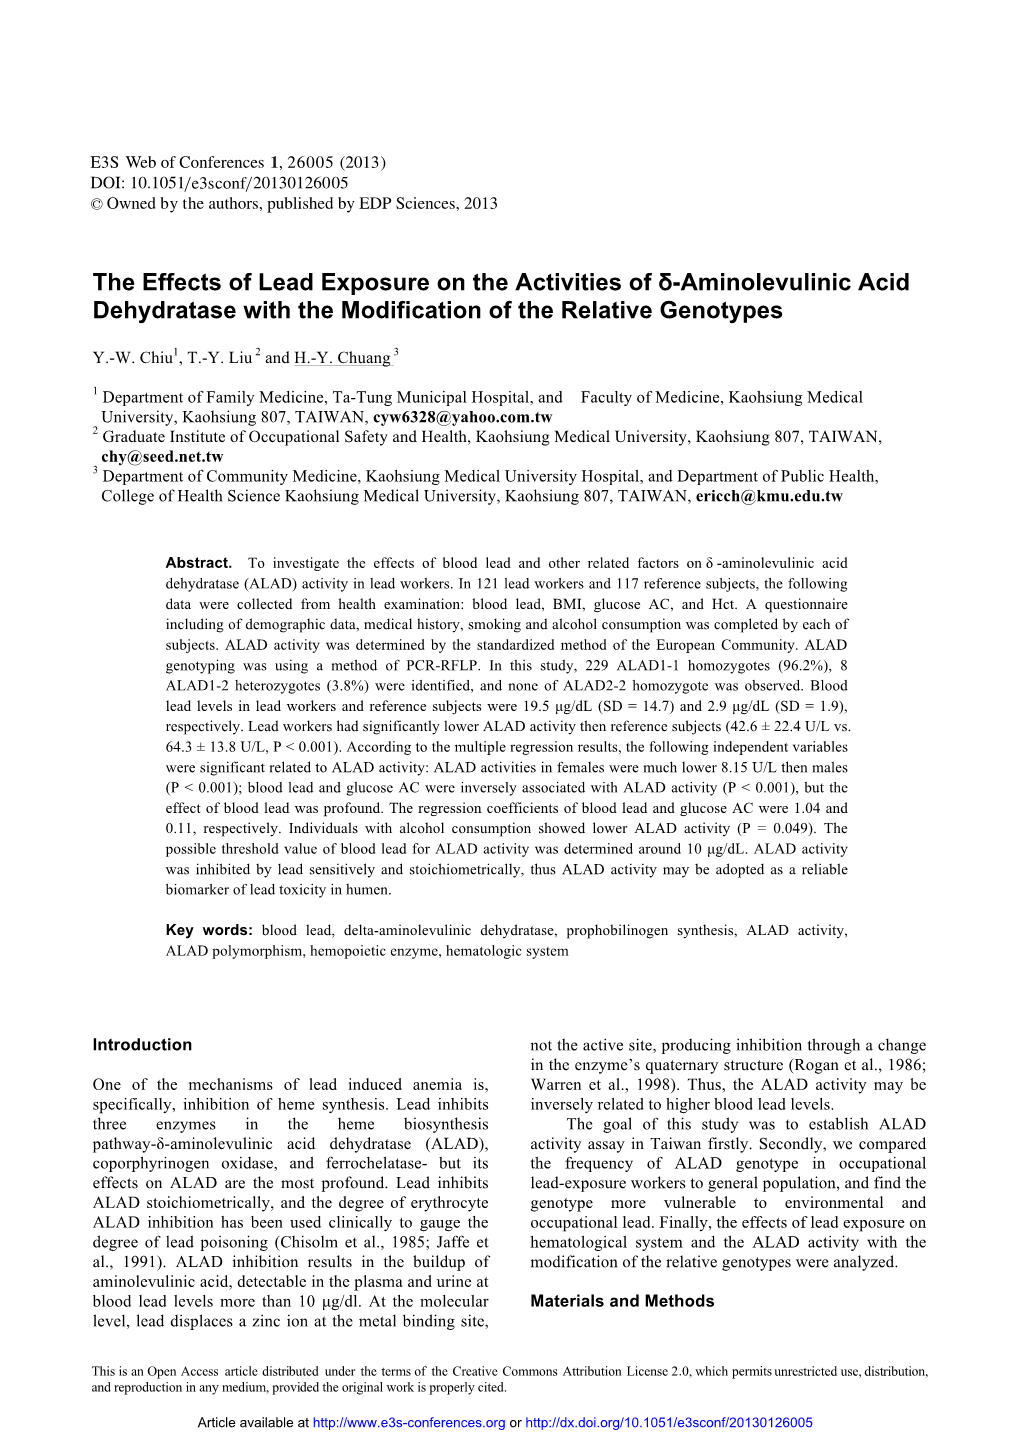 The Effects of Lead Exposure on the Activities of Δ-Aminolevulinic Acid Dehydratase with the Modification of the Relative Genotypes